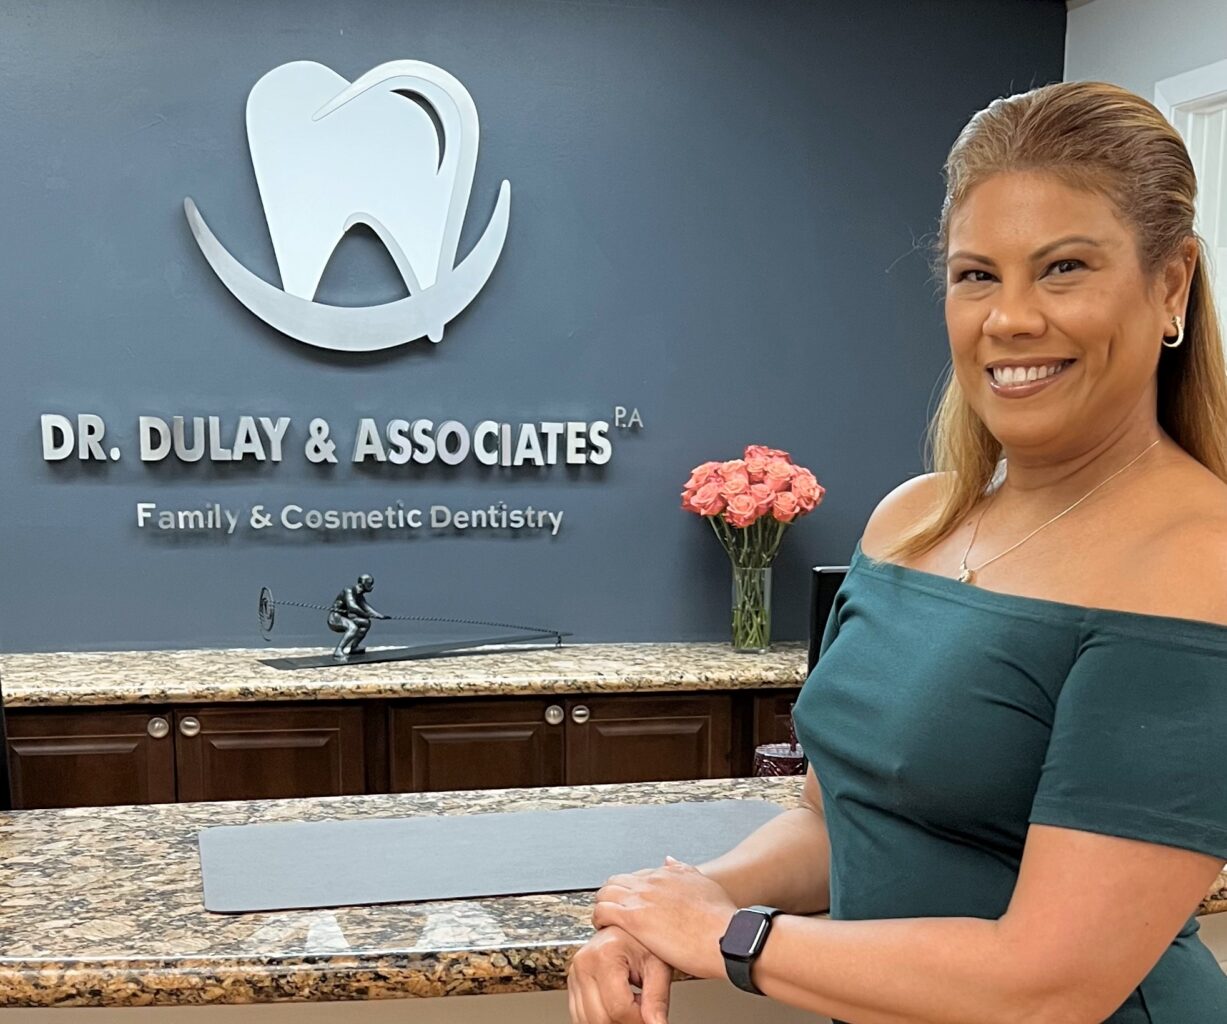 Dr. Dulay and Associates Dental Office Manager - Marisol